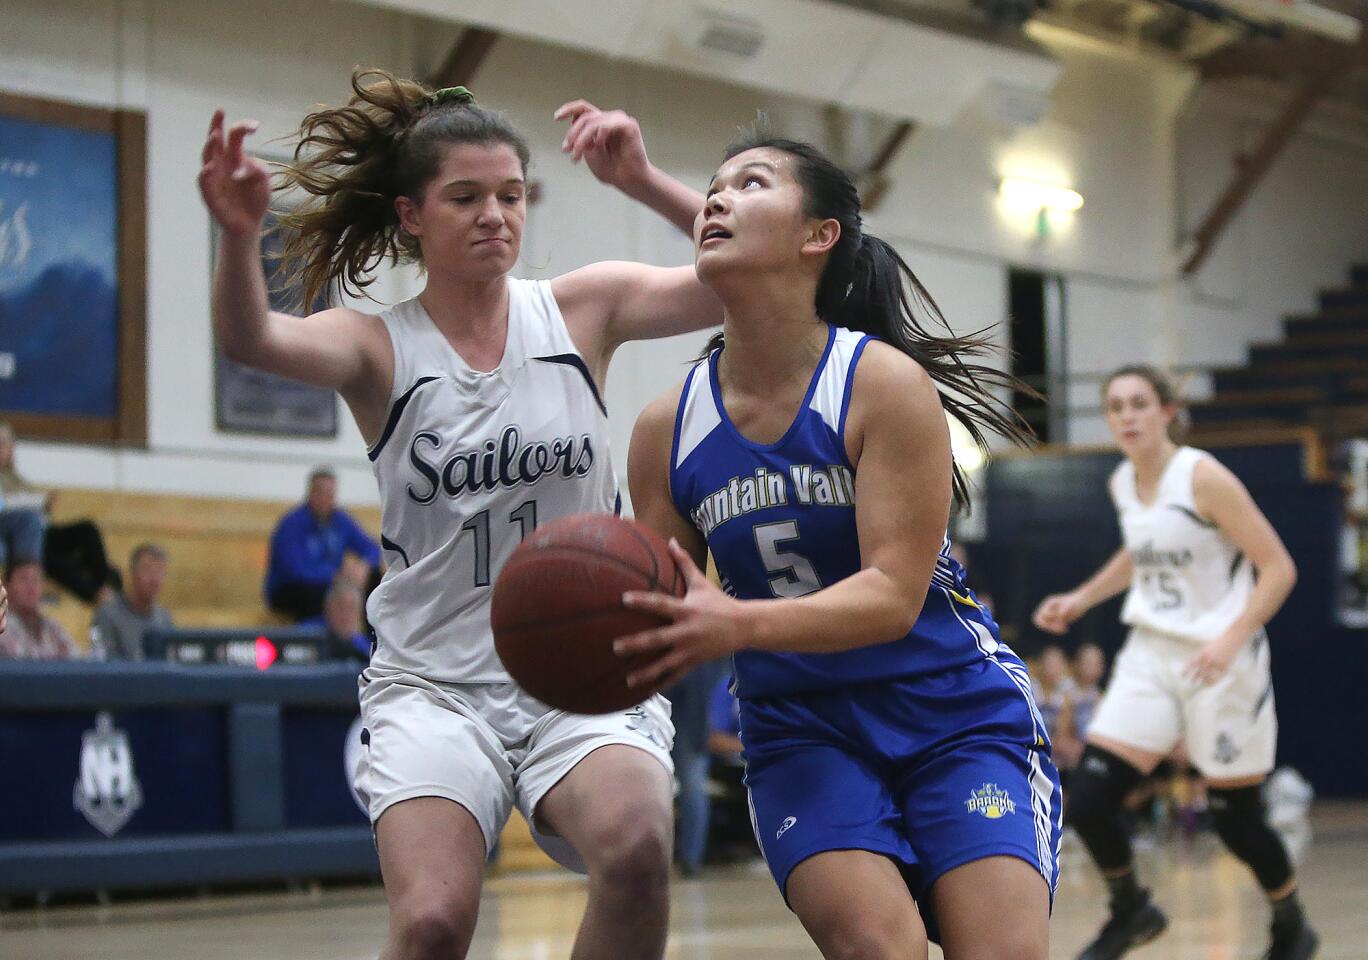 Fountain Valley High's Kat Luu drives past Newport Harbor's Chloe Swanson for a layup during a Wave League girls' basketball game on the road Thursday.